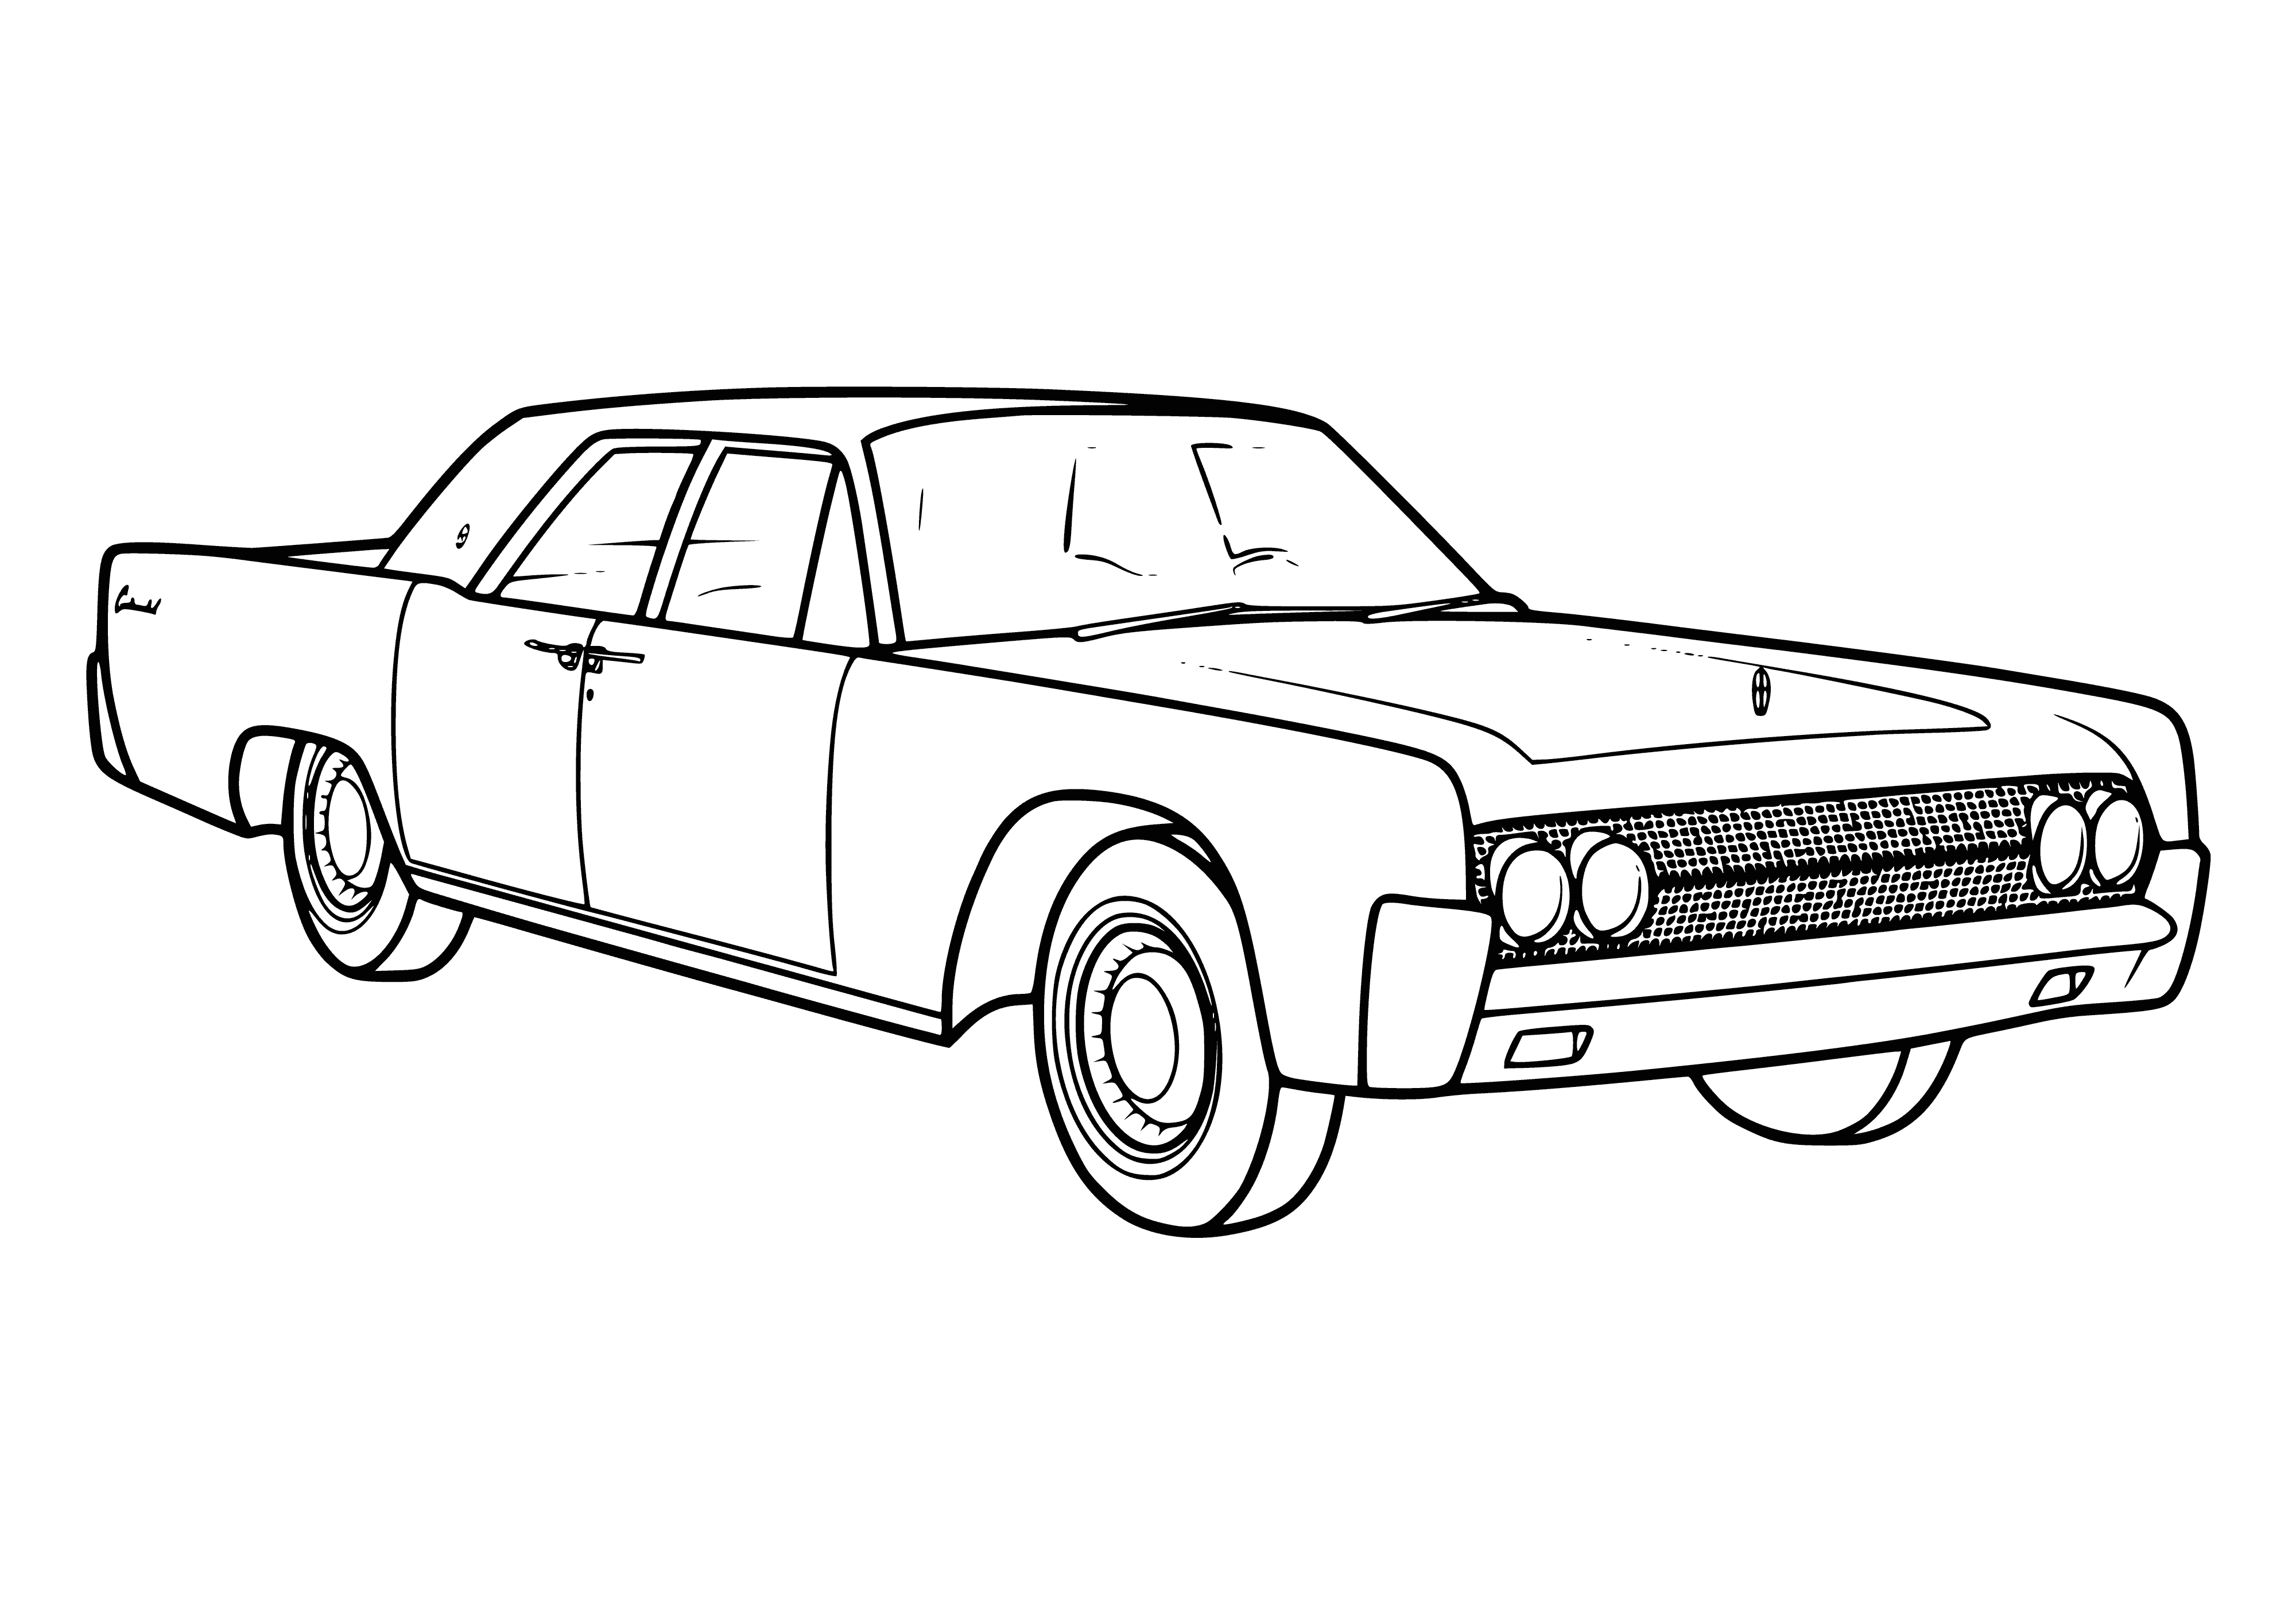 coloring page: Coloring page of cars & trucks in a lot with trees in background - all facing same direction. #coloringpage